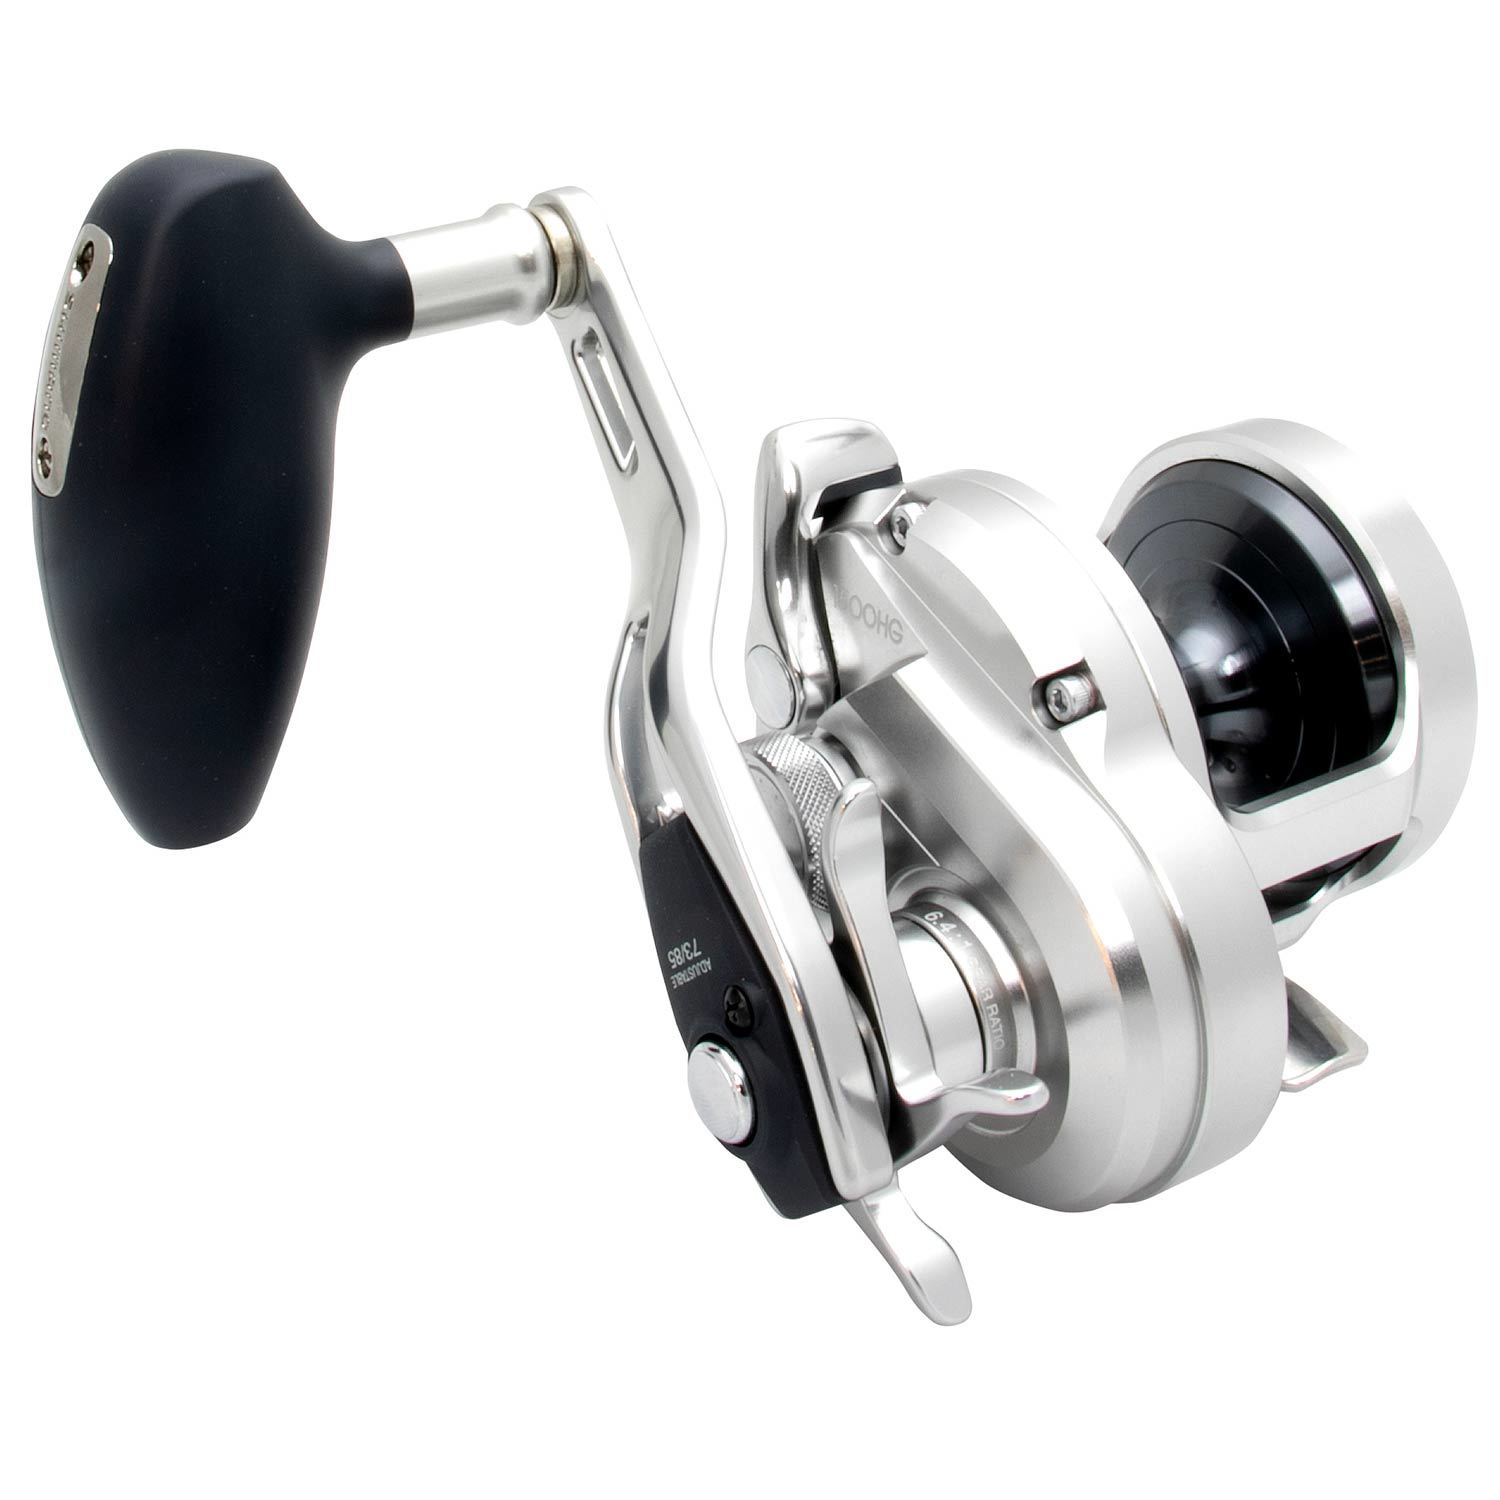 Buy Shimano Ocea Jigger 1000 HG and Grappler Type J B683 Slow Jig Combo 6ft  8in PE2.5 2pc online at